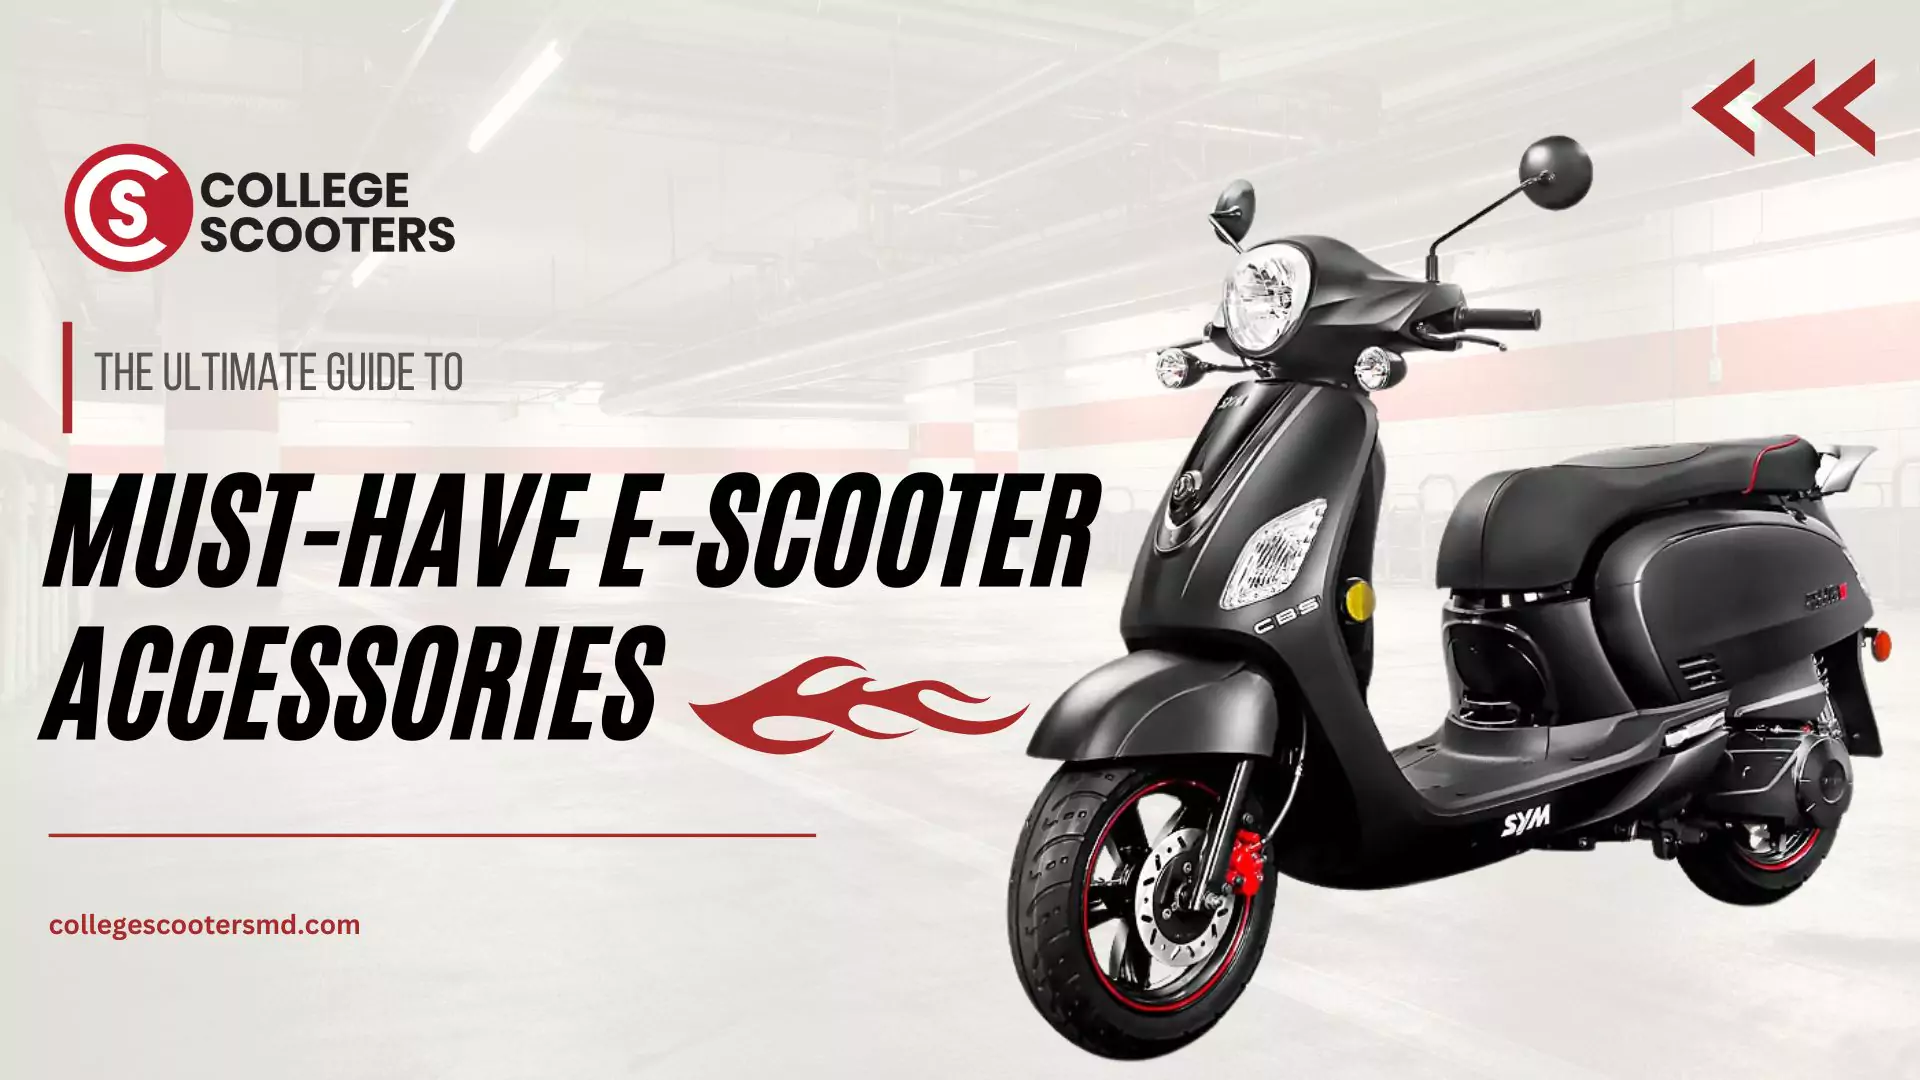 The Ultimate Guide to Must-Have E-Scooter Accessories for a Smooth Ride